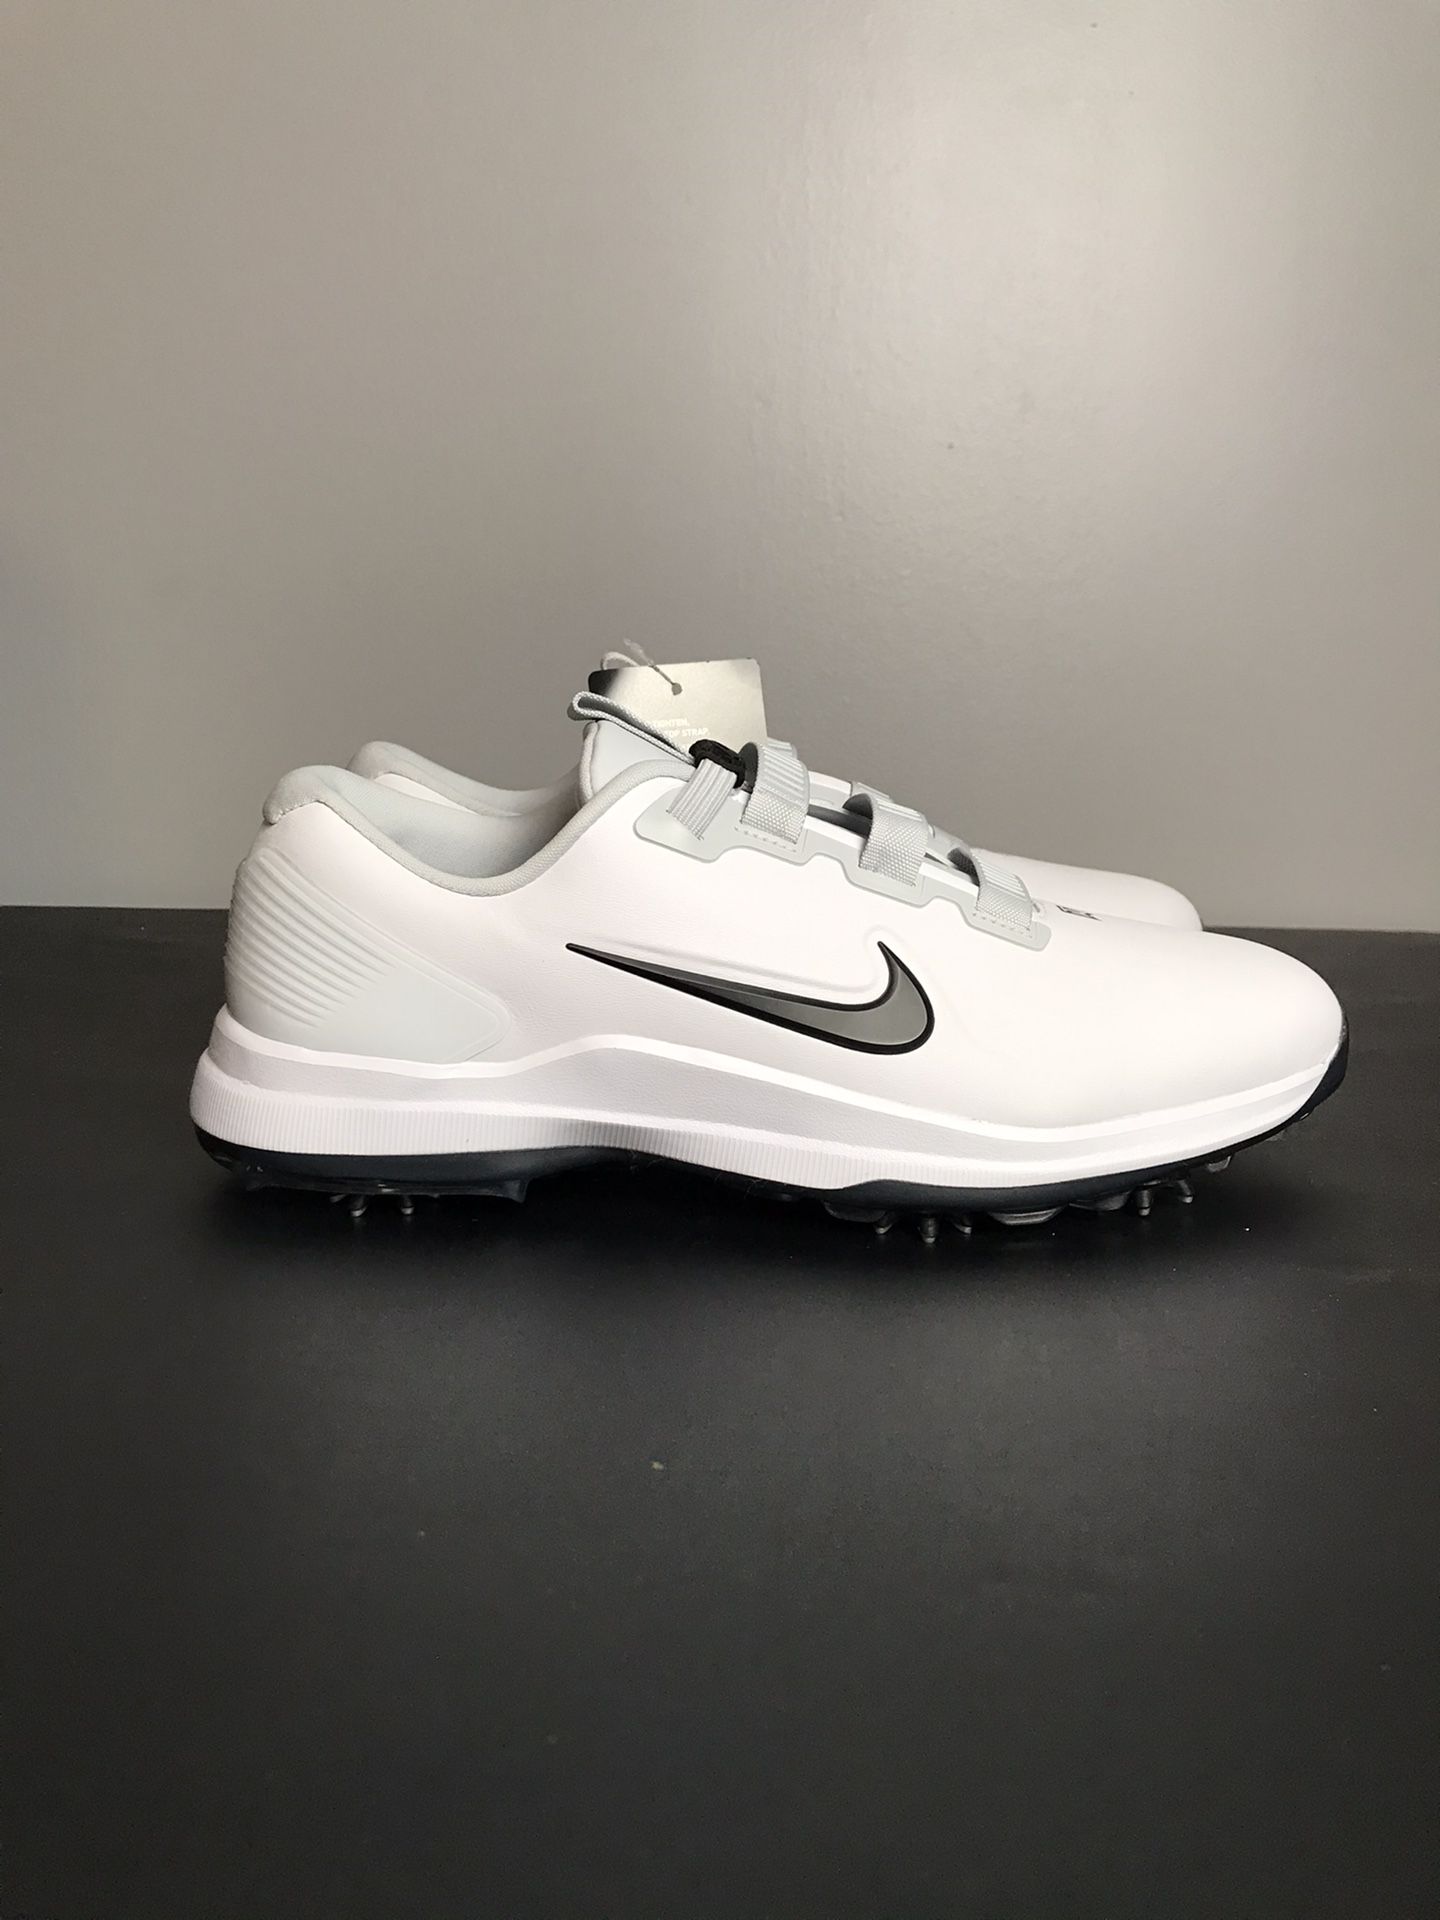 Nike Tiger Woods TW71 Fast Fit White Golf Shoes CD6300-100 Men’s Size 12